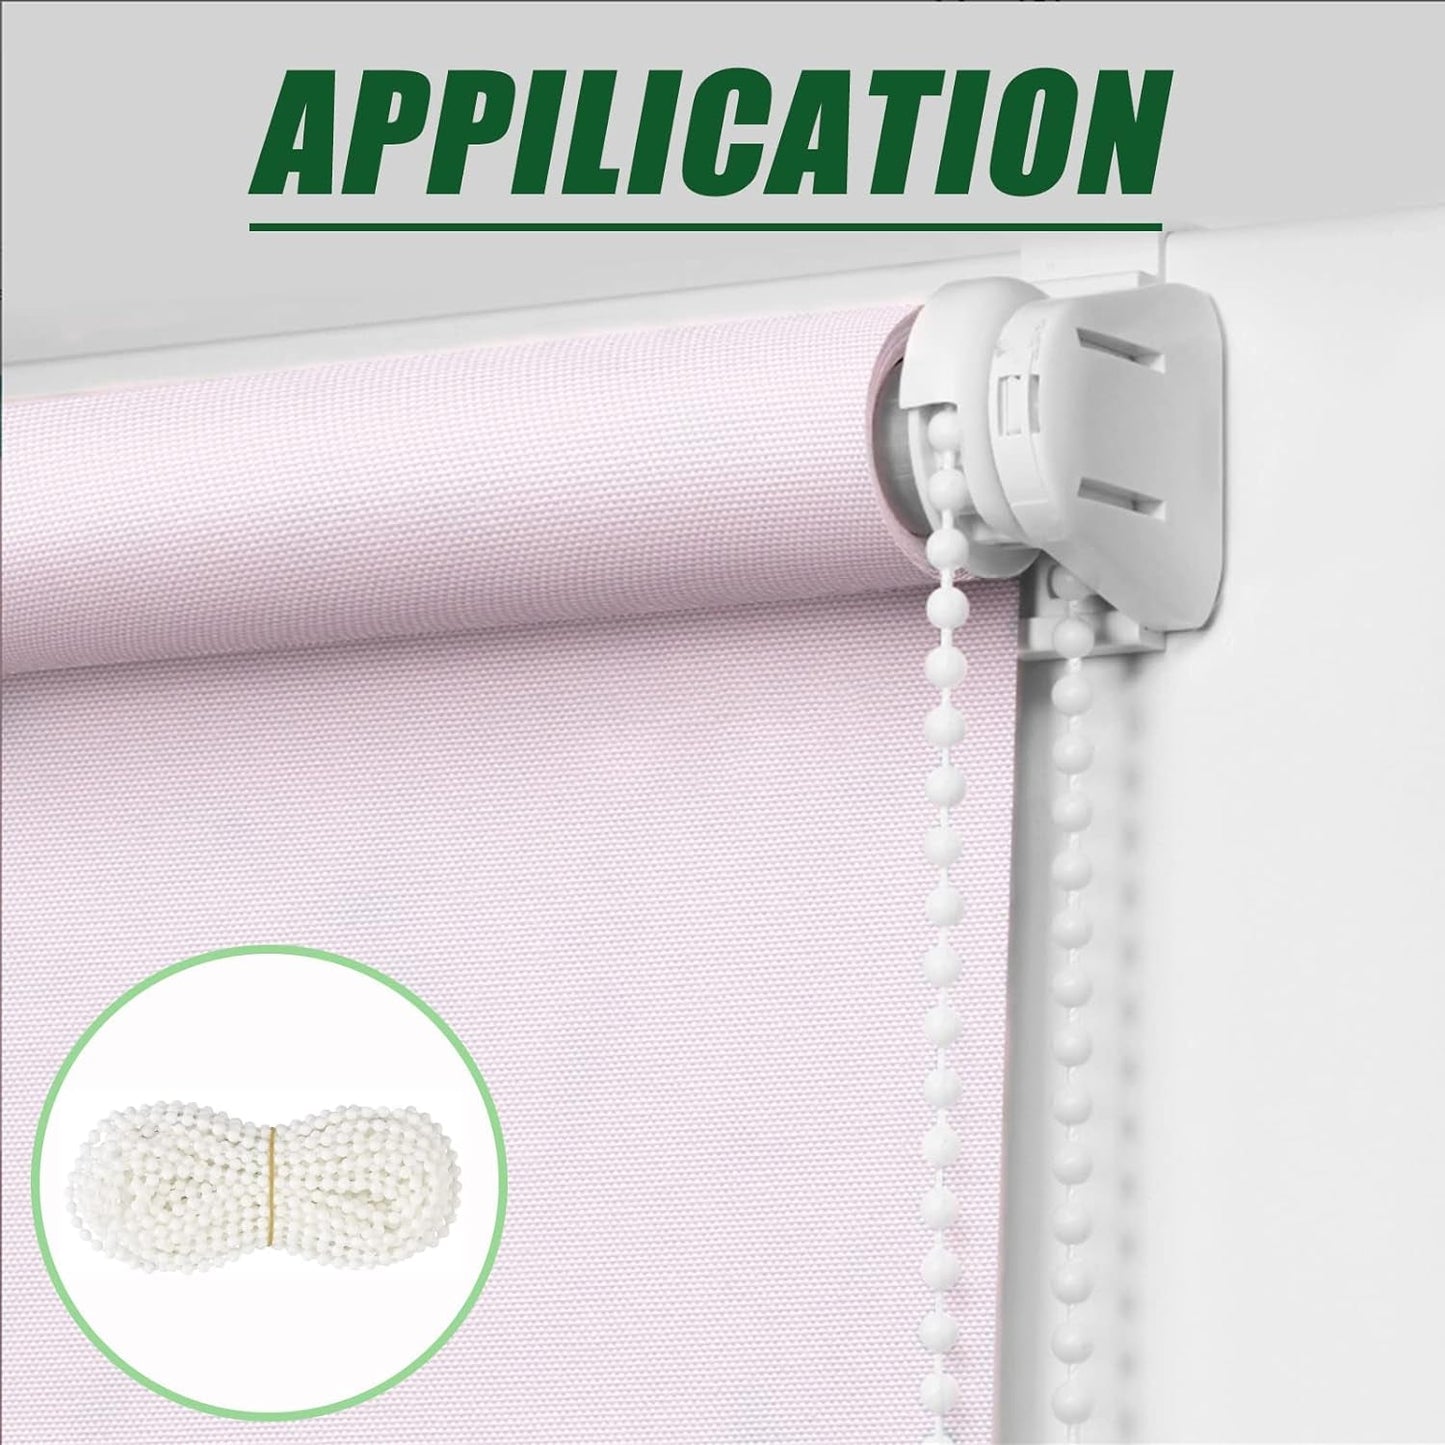 10 Meters (32.8 Feet) Roller Blind Bead Chain Cord Roman Venetian Honeycomb Vertical Shade Blind Cord with 10 PCS Connectors for Roller Blind Replacement Parts White (Normal Version)